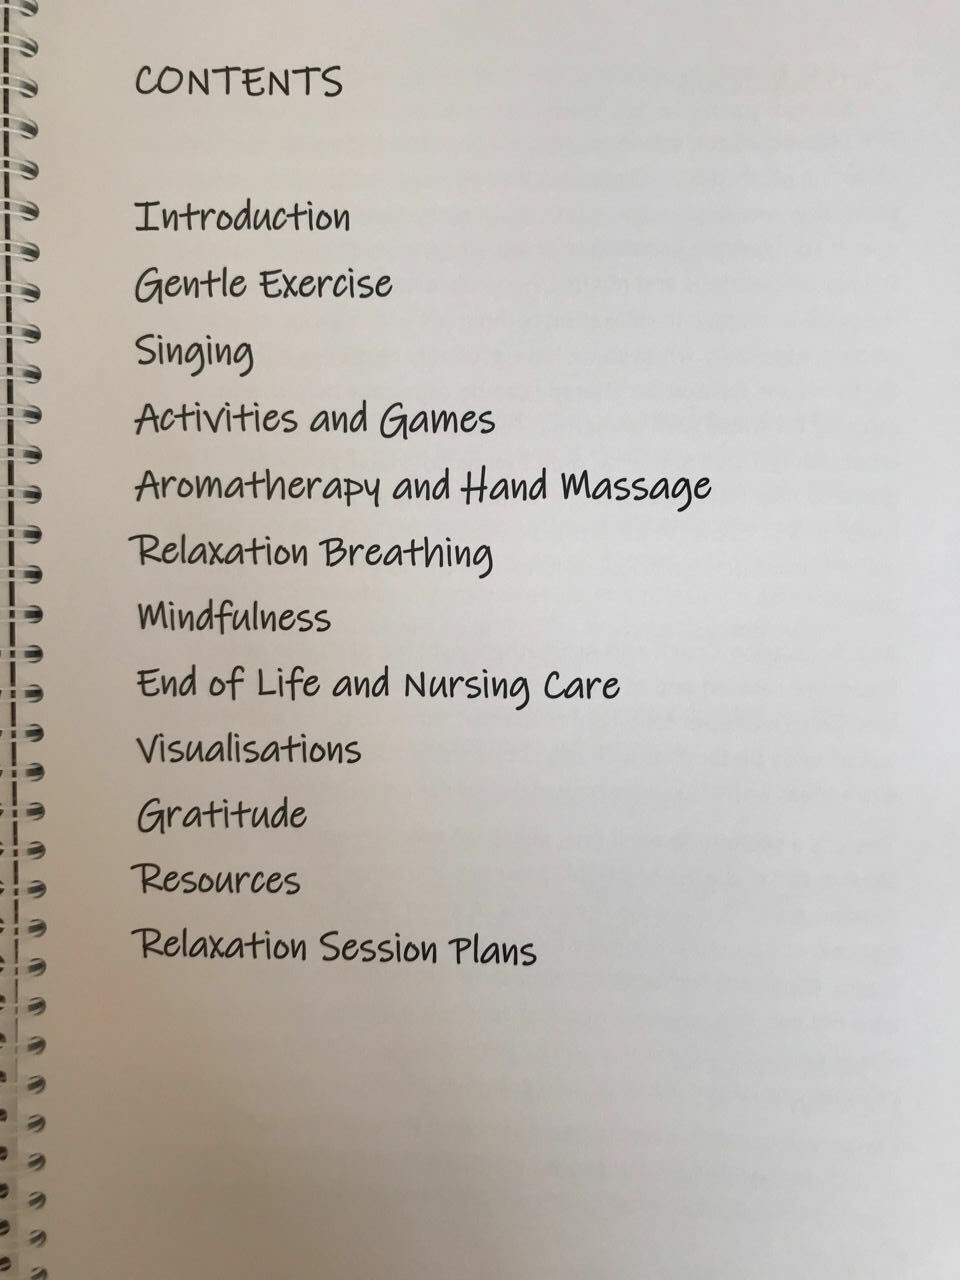 The Essential Guide to Relaxation Therapy Book